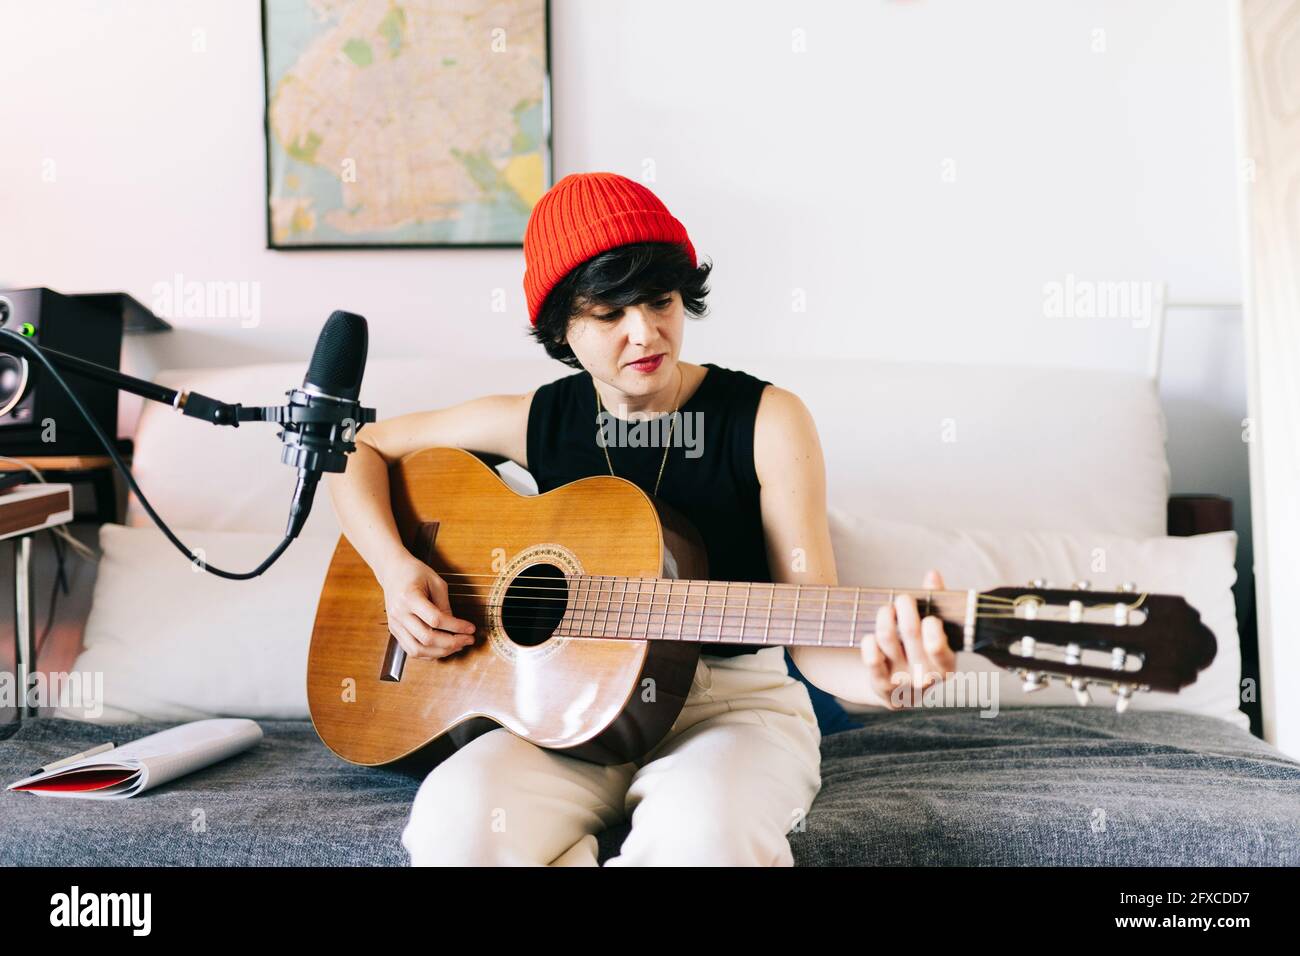 Female composer wearing knit hat playing guitar while recording at studio Stock Photo